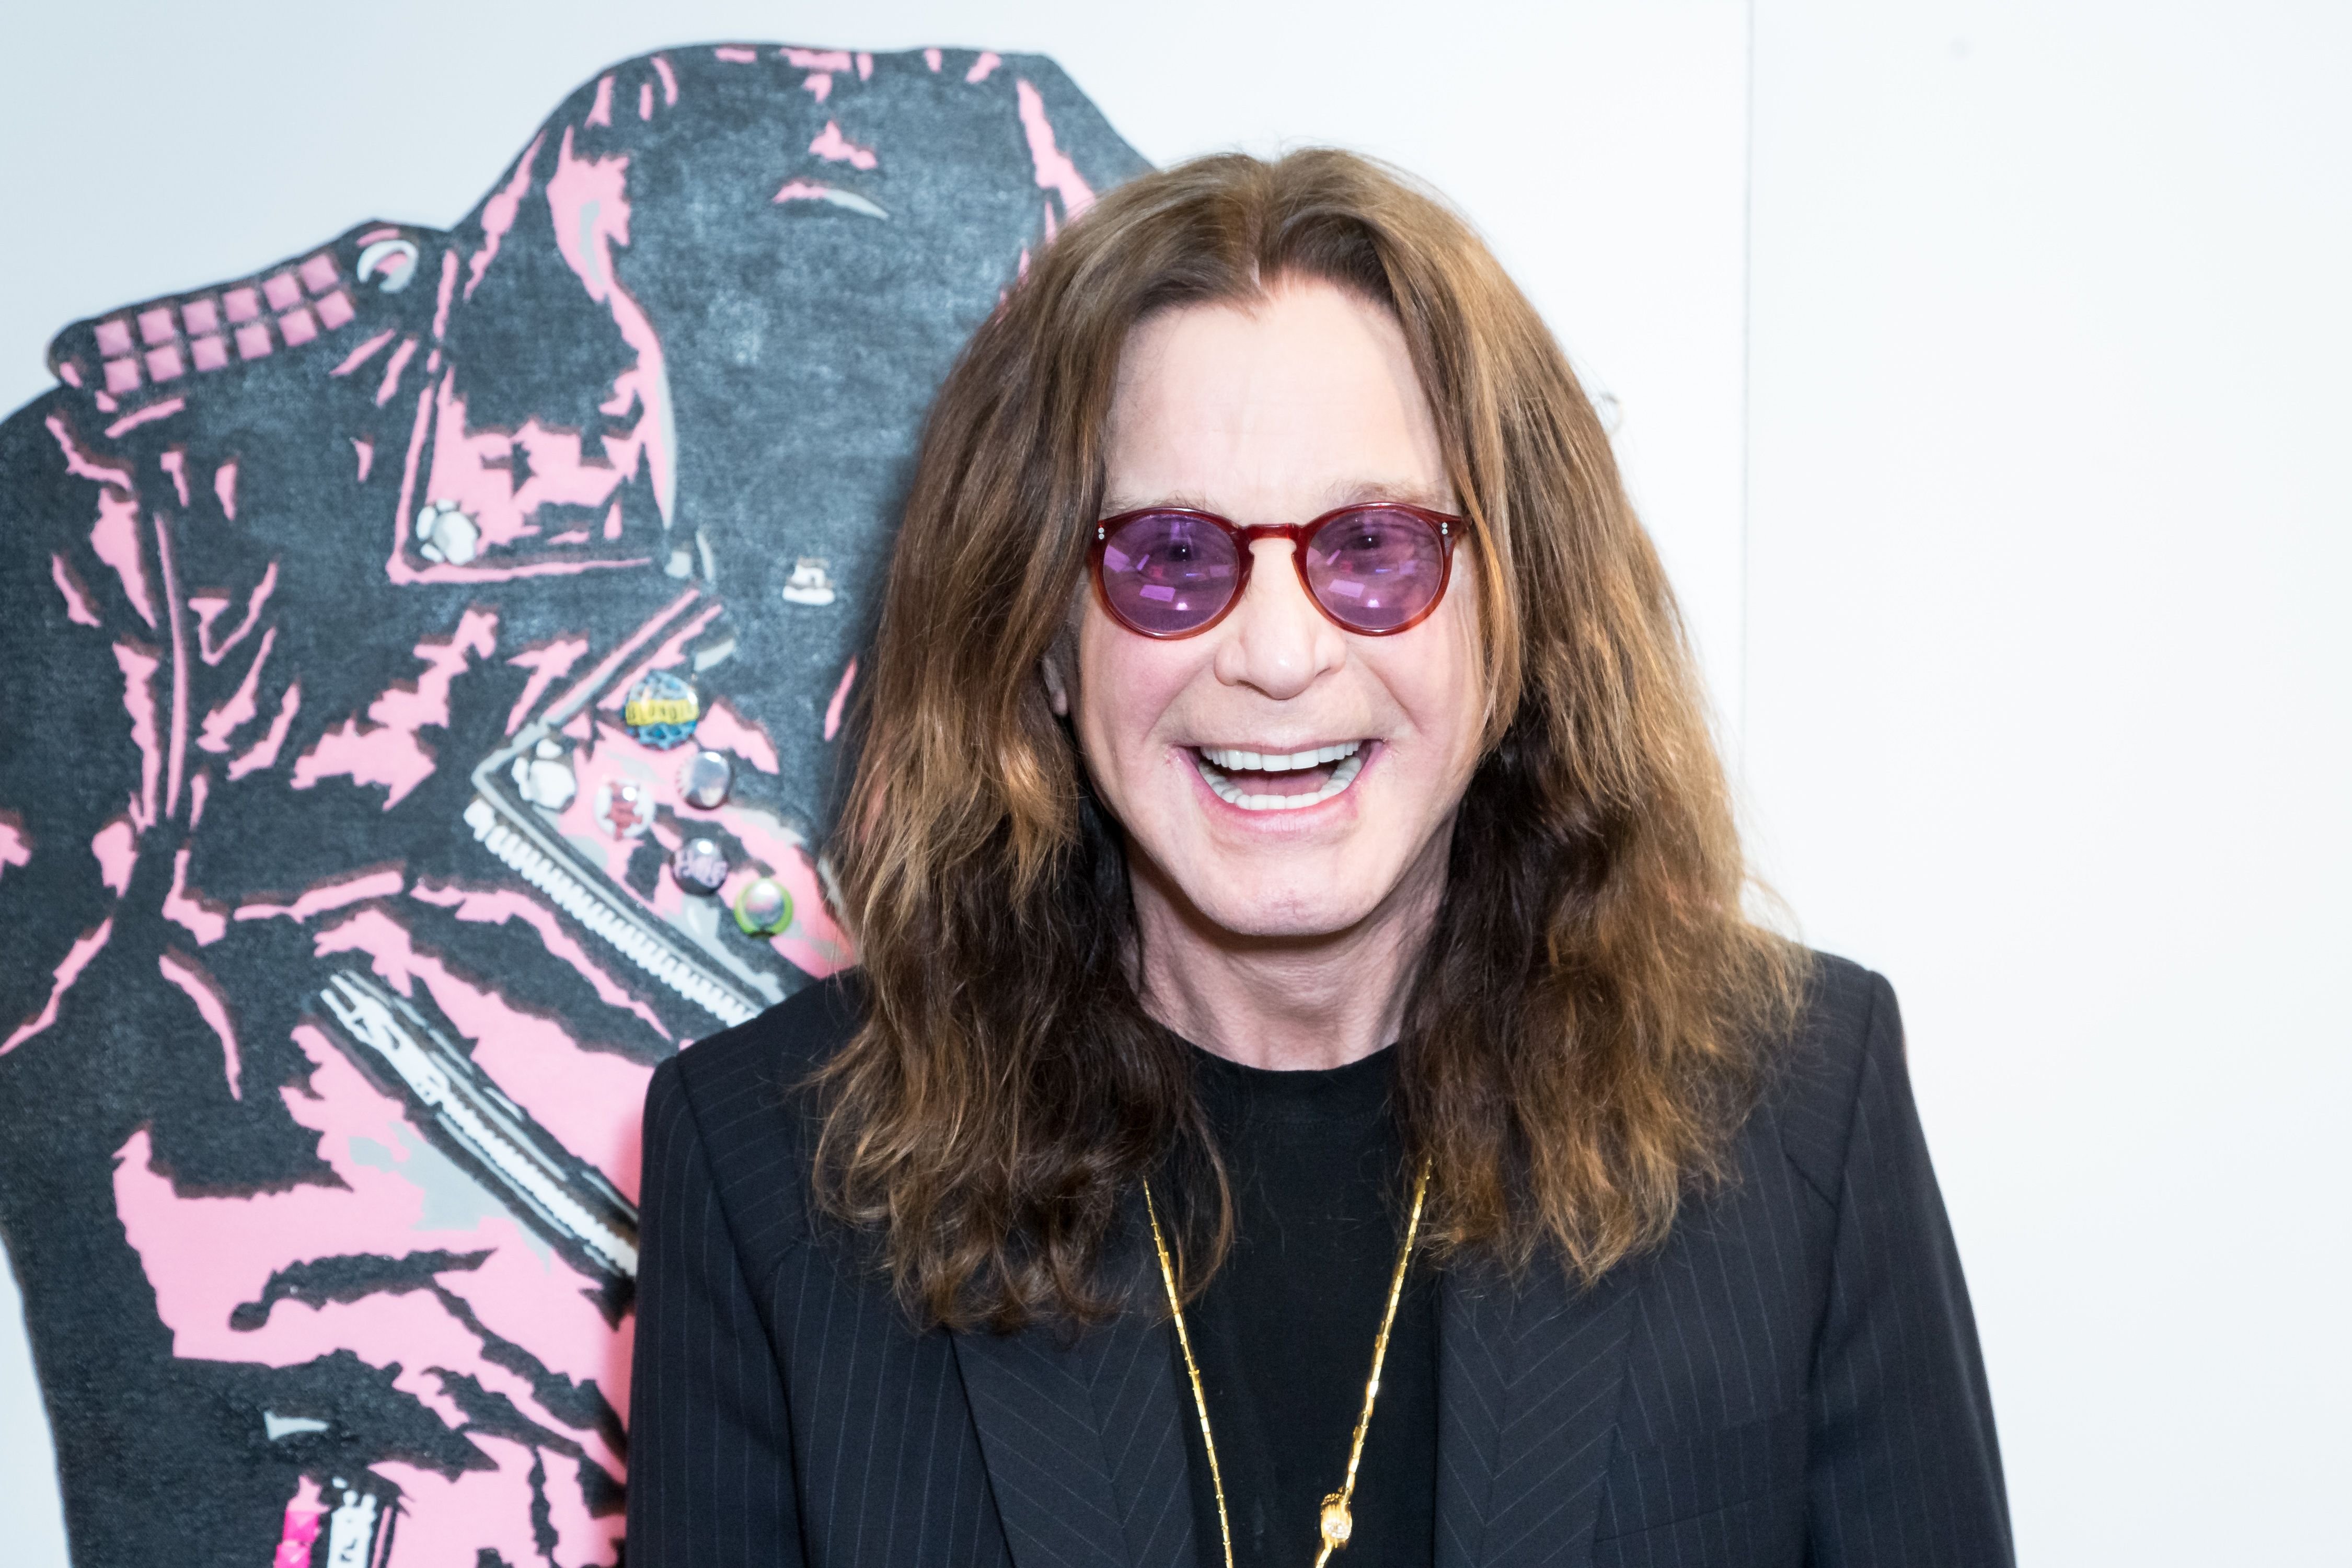 Ozzy Osbourne at the Billy Morrison - Aude Somnia Solo Exhibition at Elisabeth Weinstock on September 28, 2017 in Los Angeles, California. | Source: Getty Images